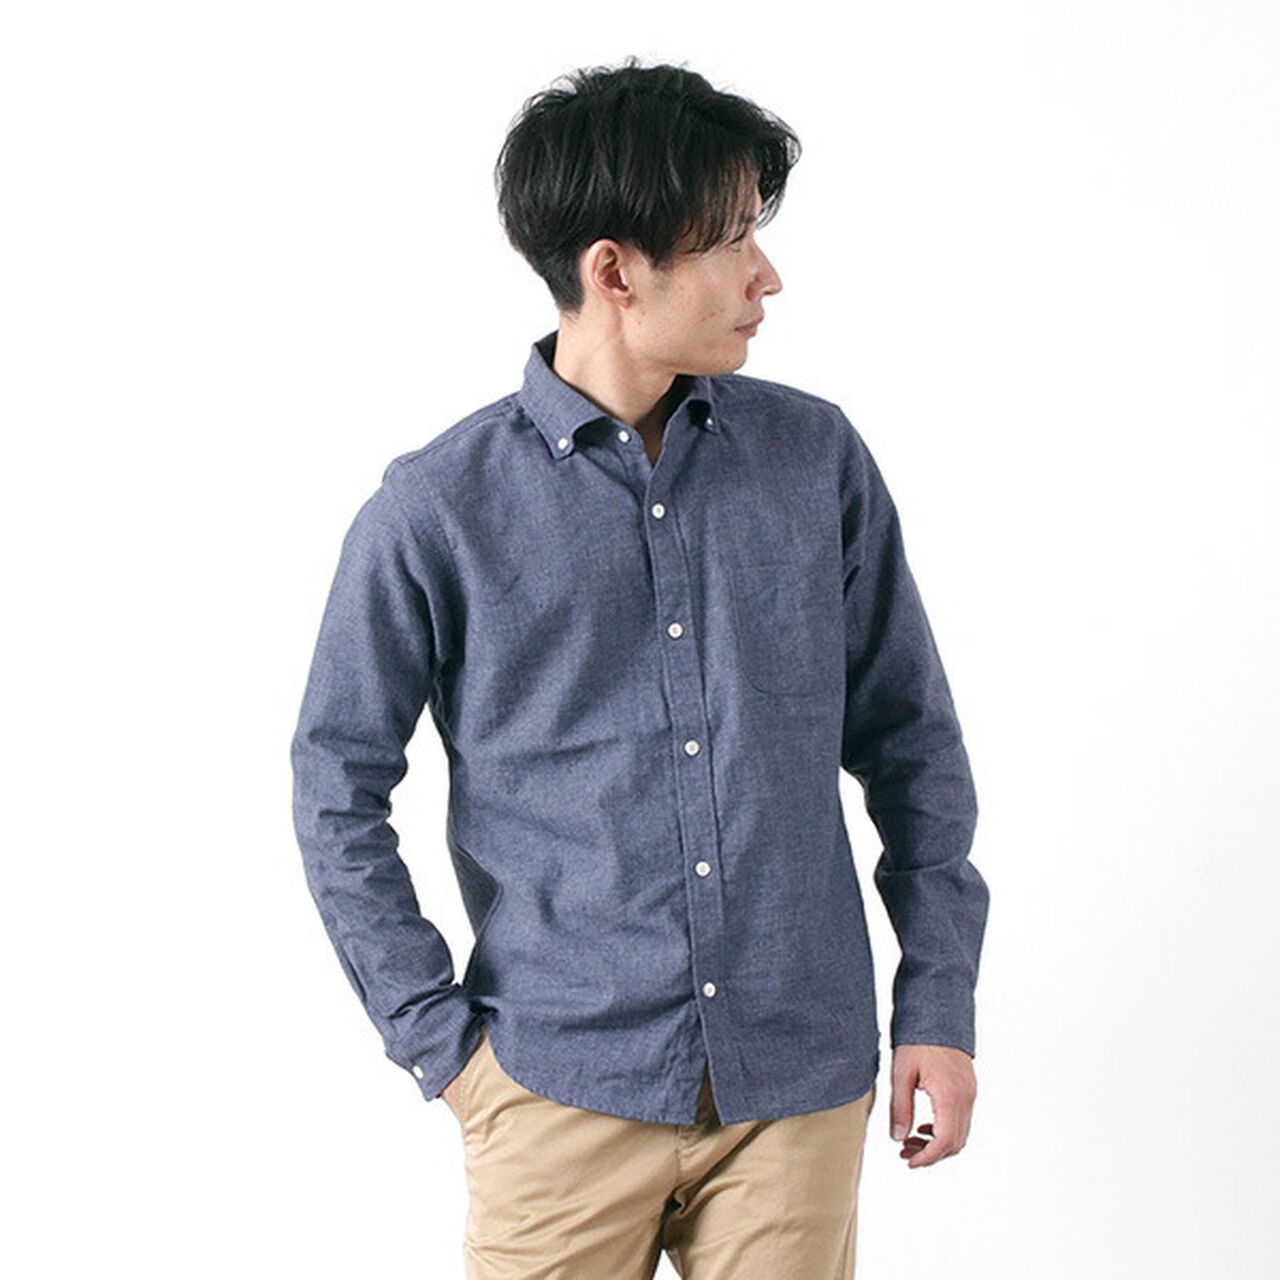 French Linen Long Sleeve Button Down Shirt,Navy, large image number 0